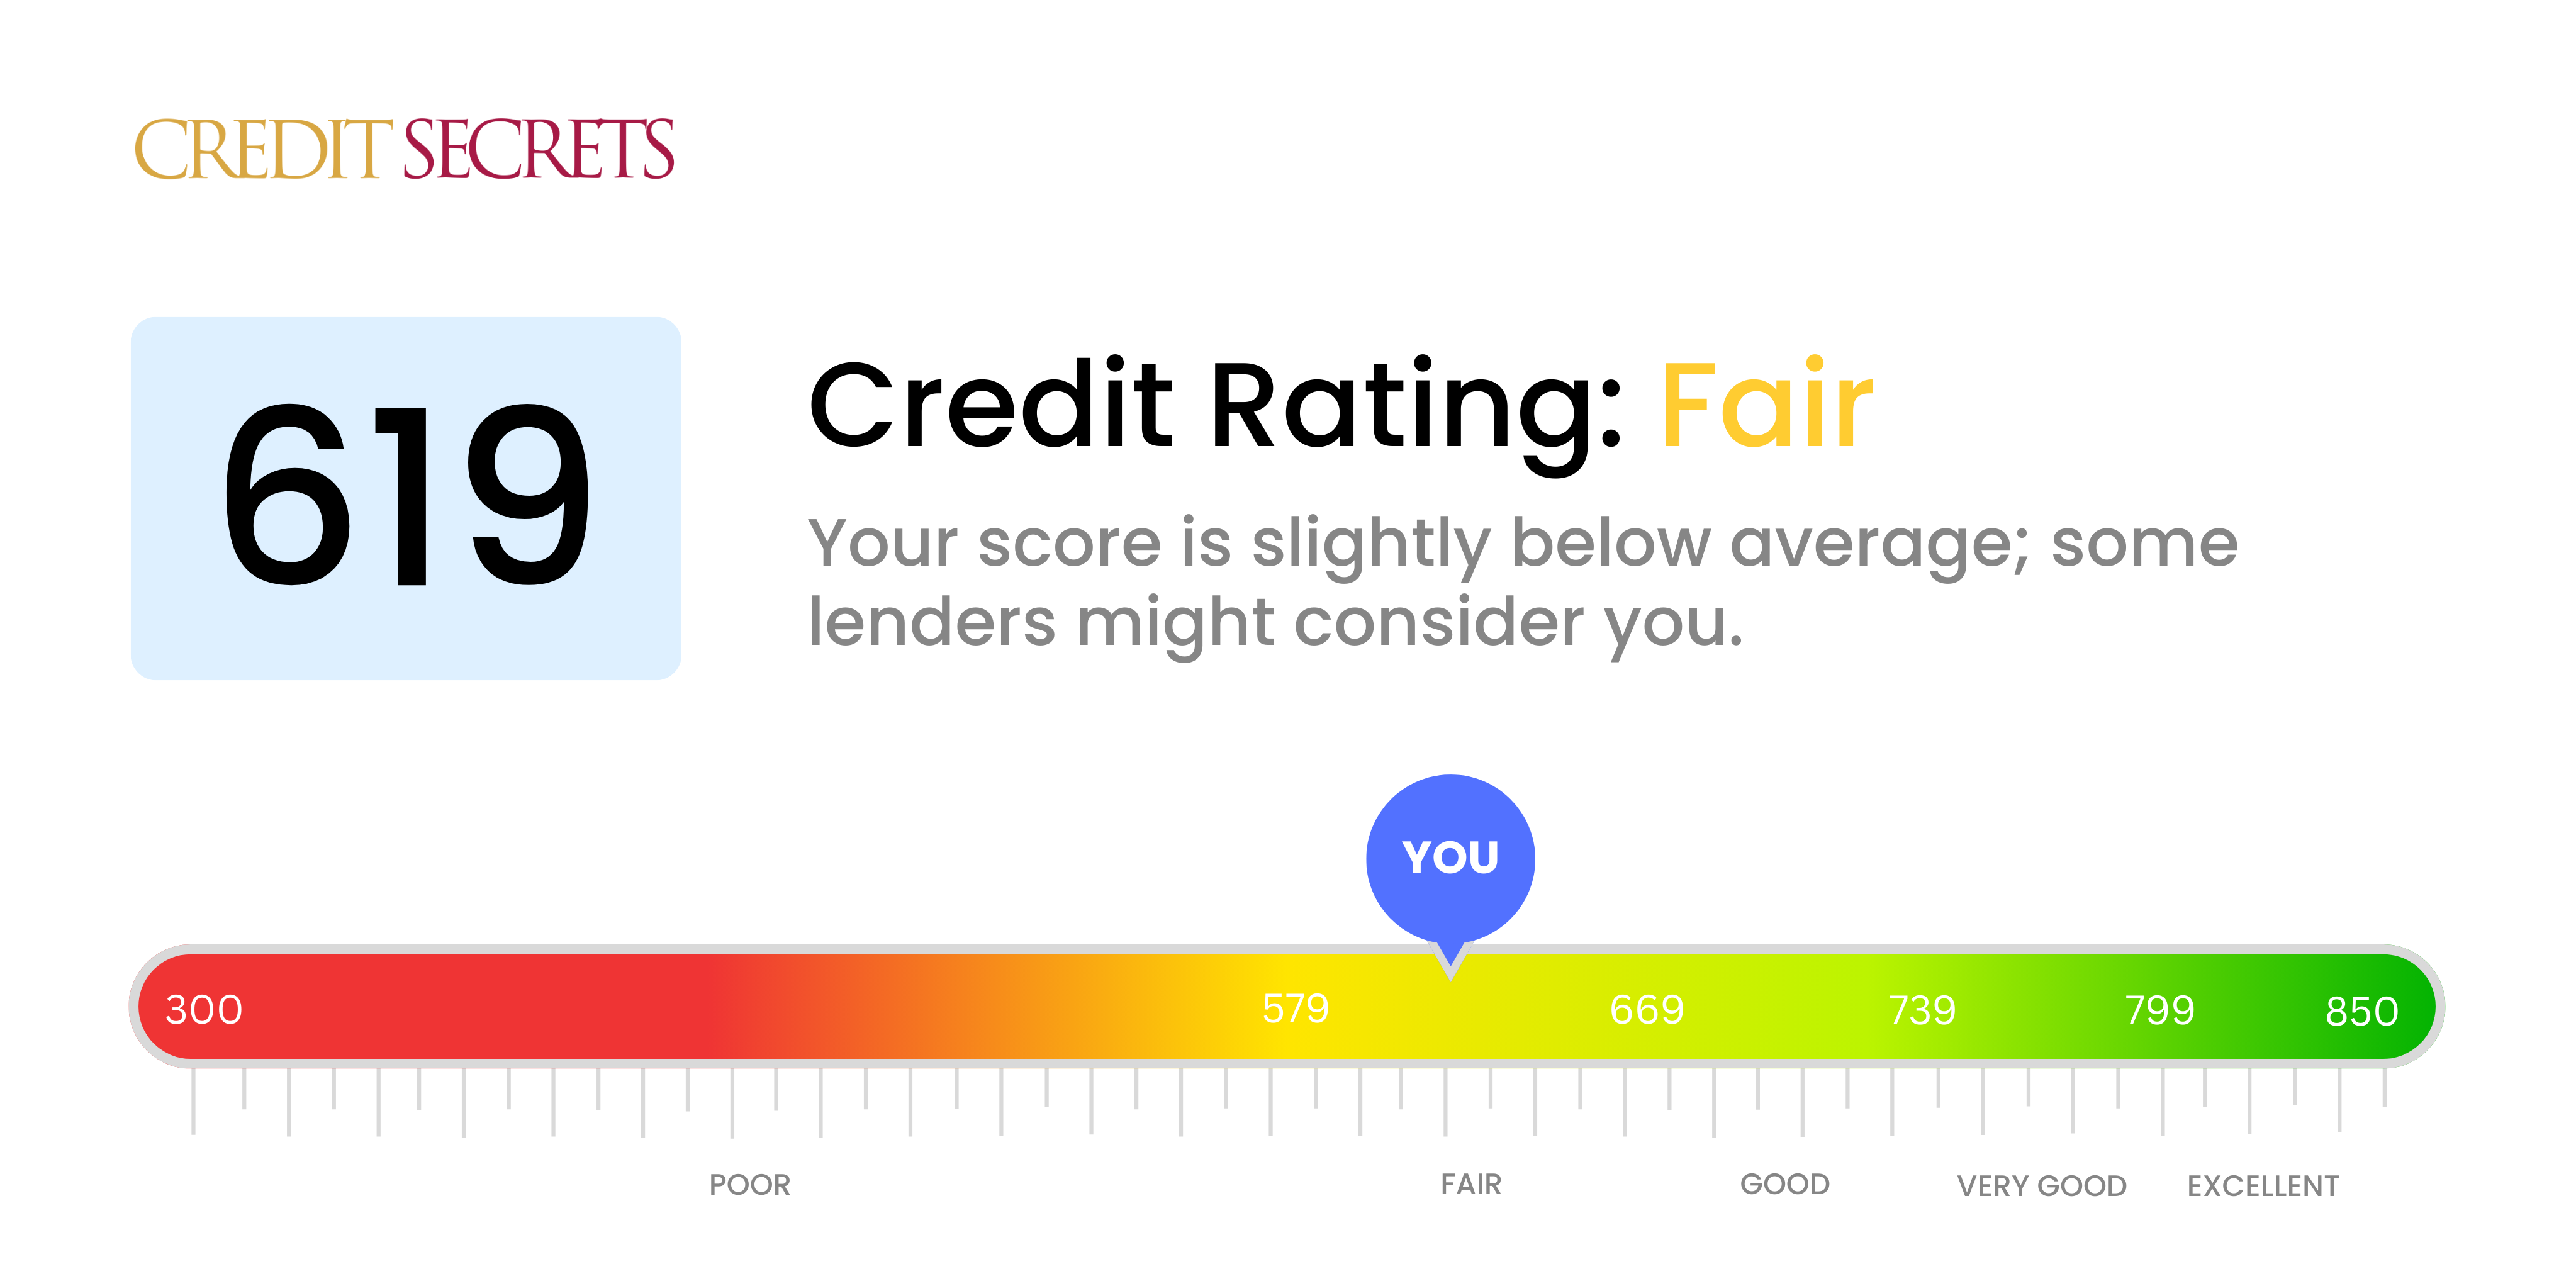 Is 619 a good credit score?